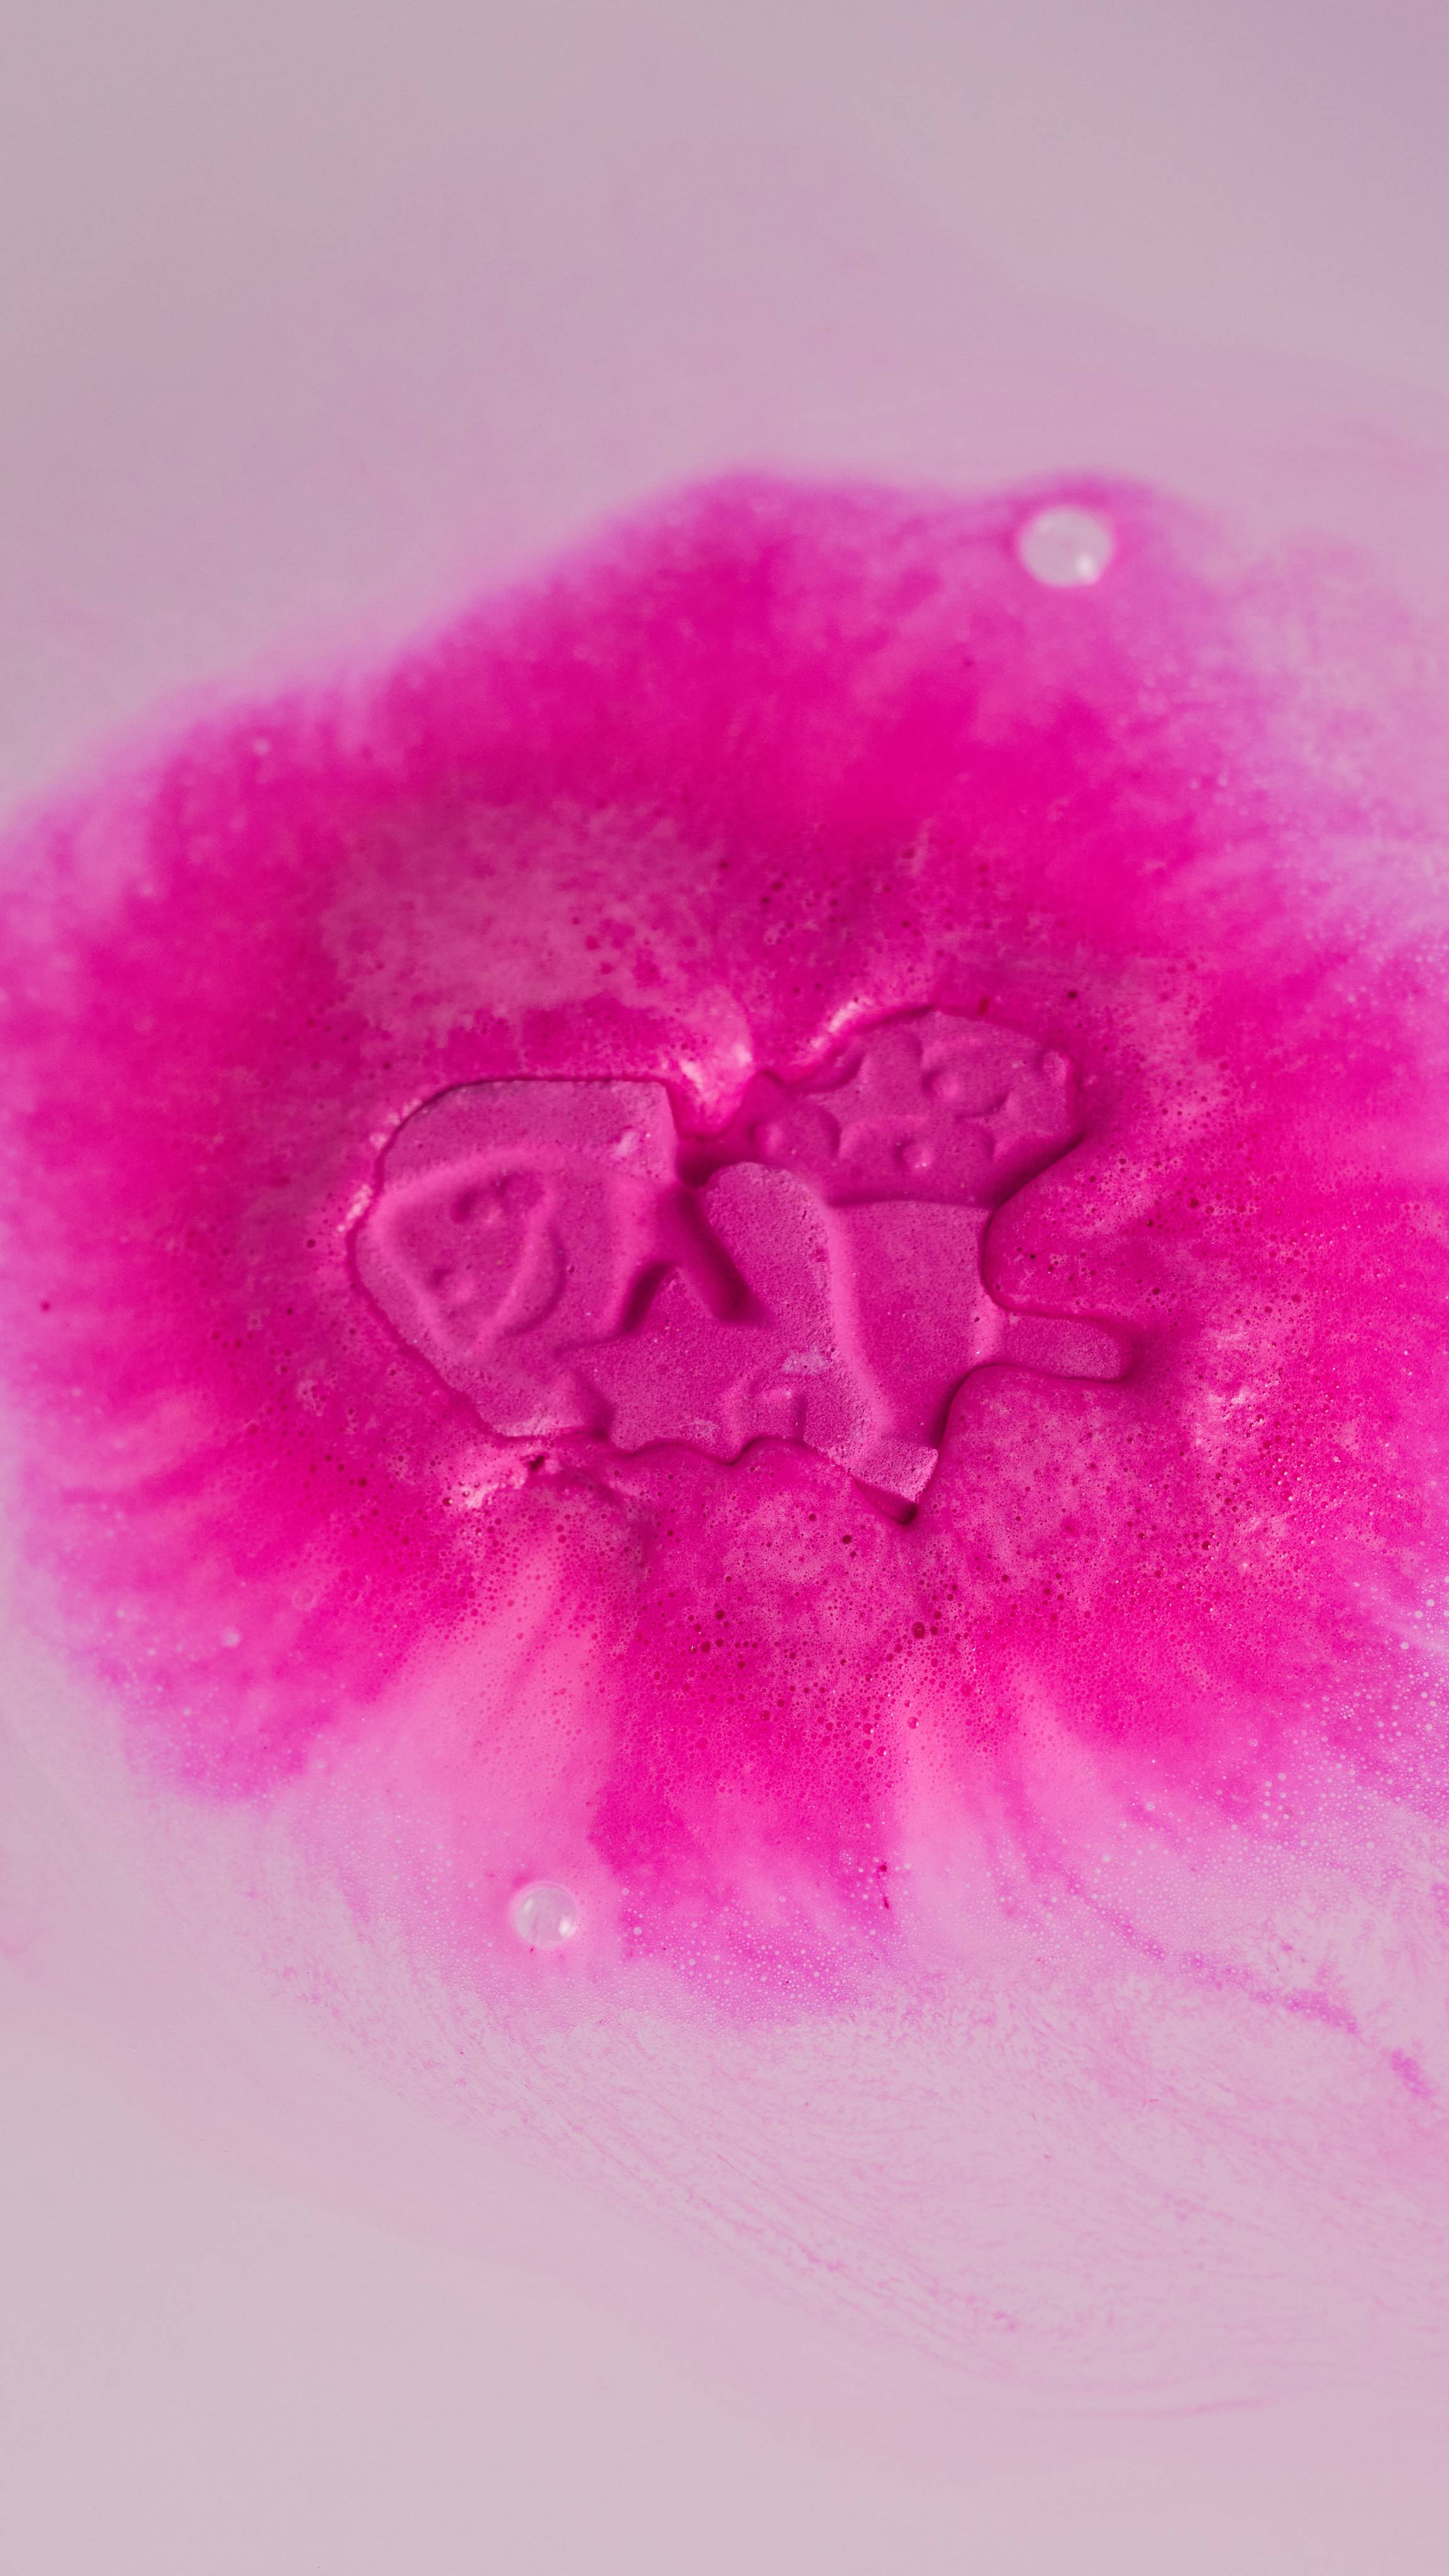 The Groovy Fairy bath bomb has just been placed in the bath. The vivid fuchsia is melting out into the clear water.